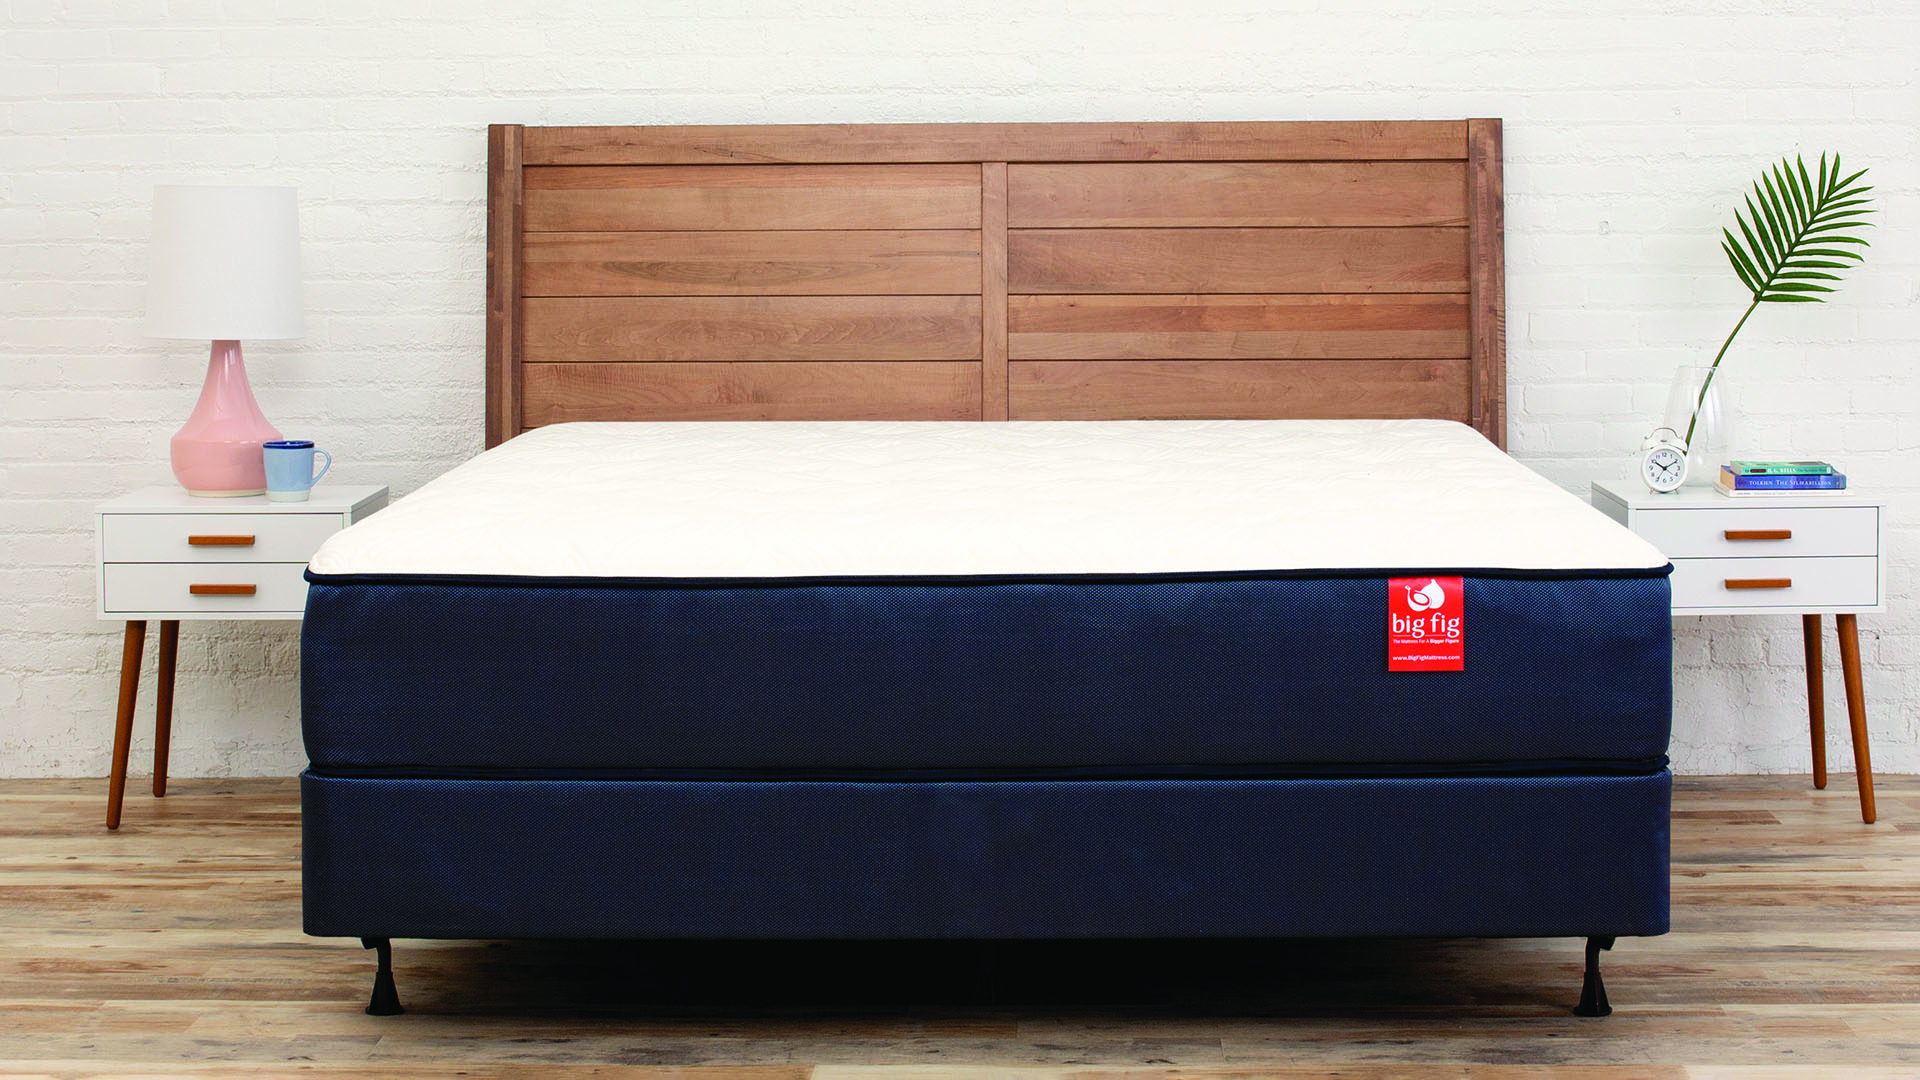 The Big Fig mattress for heavy people shown on a wooden bedframe next to white bedside cabinets